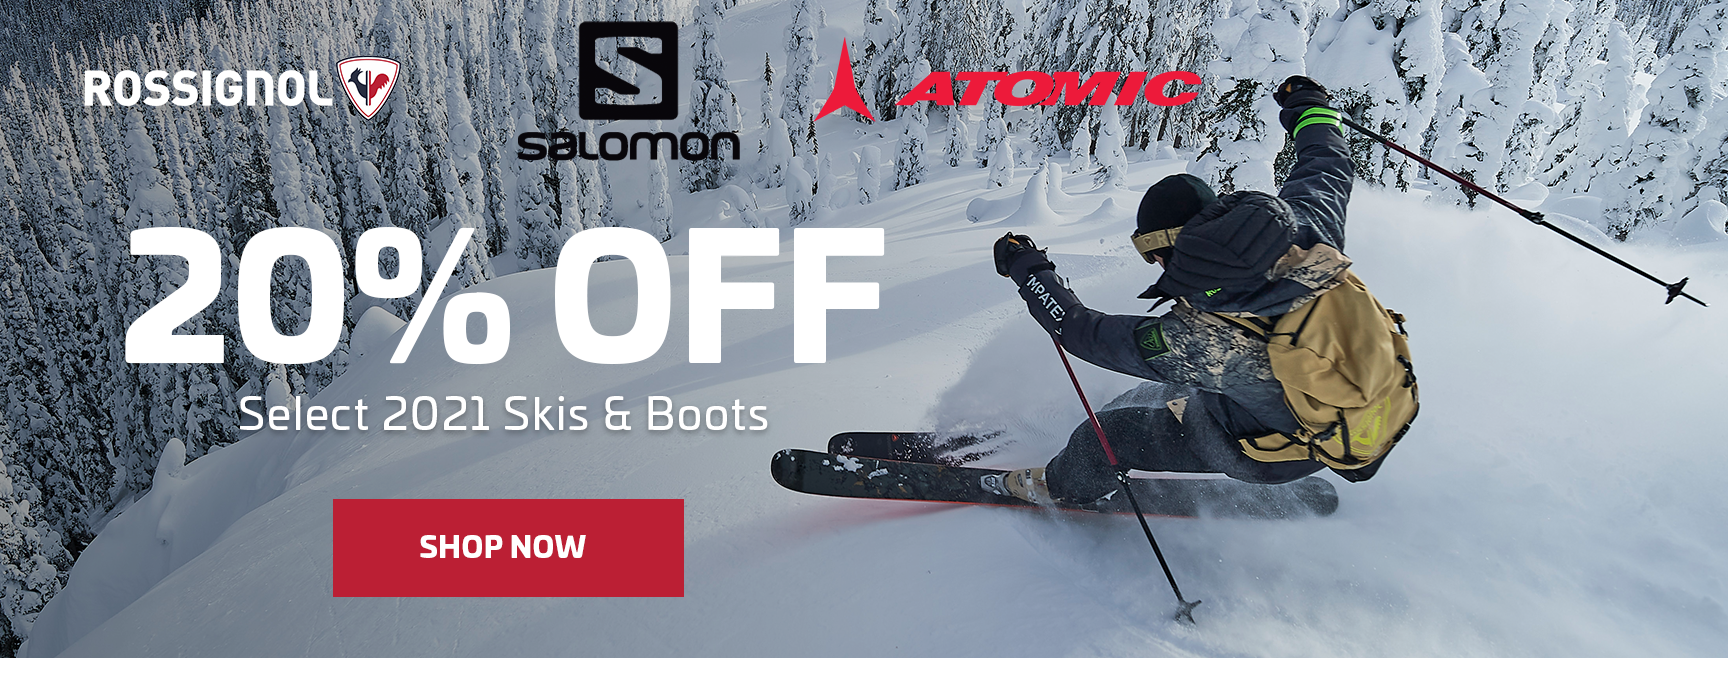 20% OFF SELECT 2021 SKIS & BOOTS - FOOTER